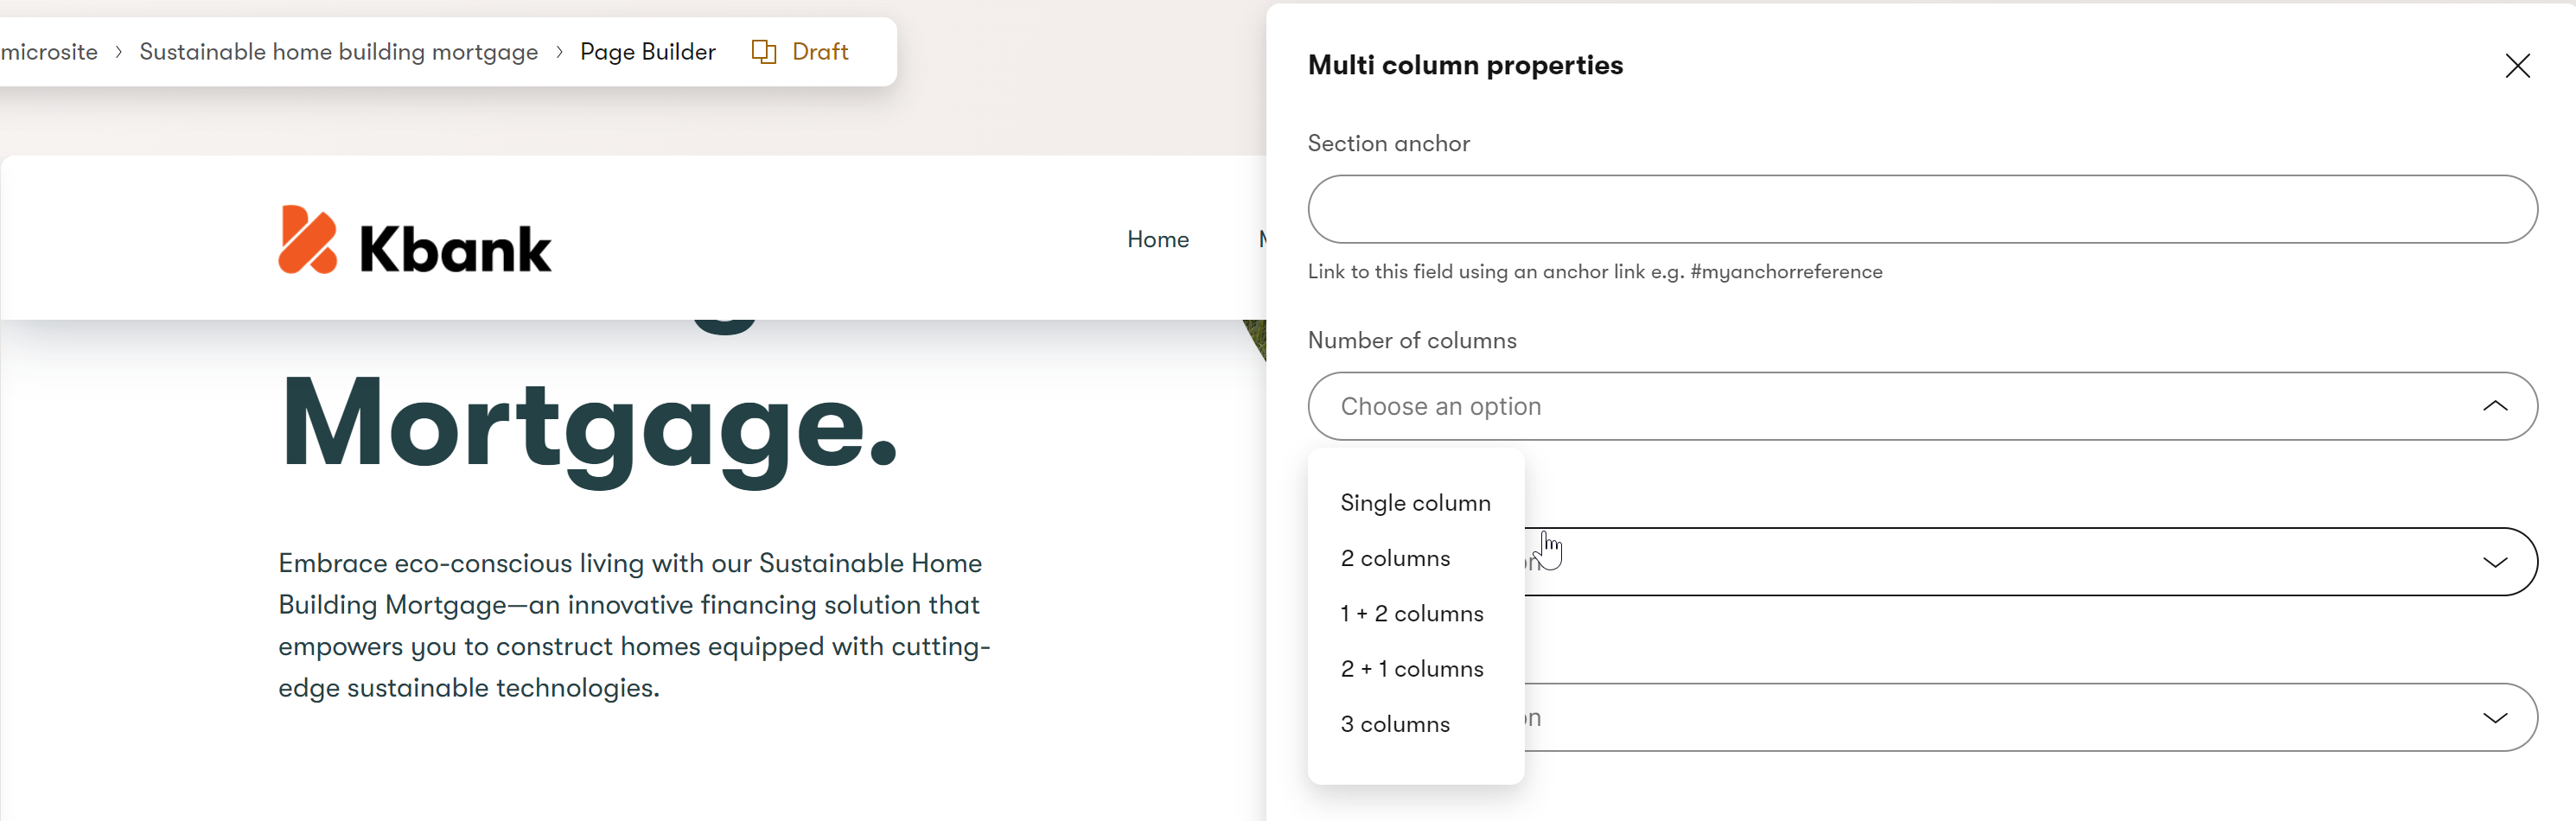 Multicolumn section properties on the Kbank demo site